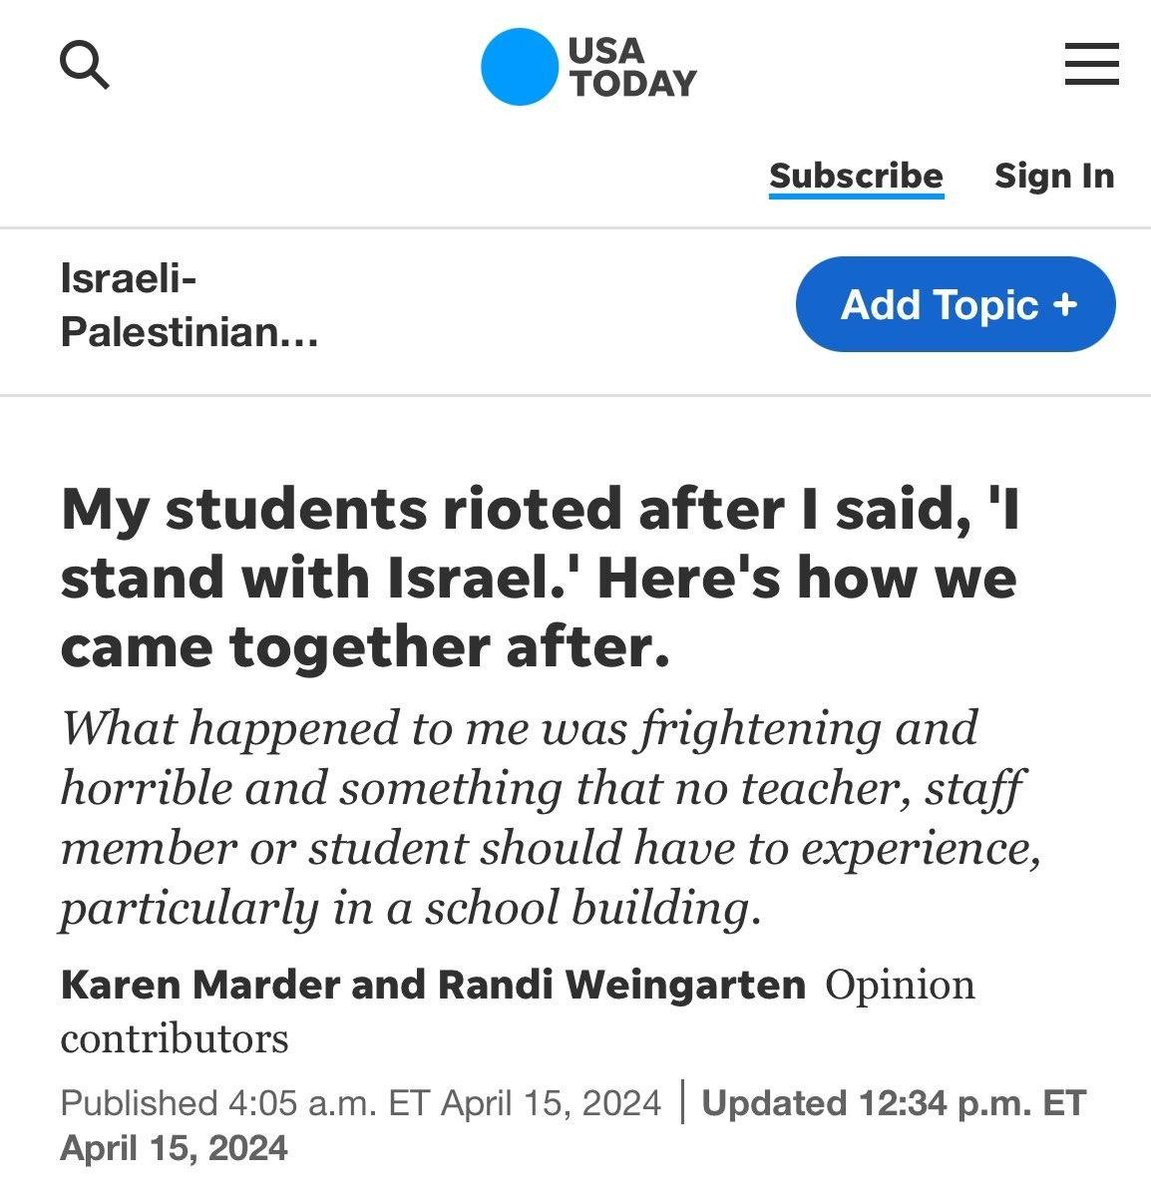 There should be *zero tolerance* for students rioting and intimidating a teacher for simply standing with Israel. Of course Randi Weingarten attempts to coddle the students responsible. There’s no meeting in the middle on this. Jewish hatred has no place in our schools.